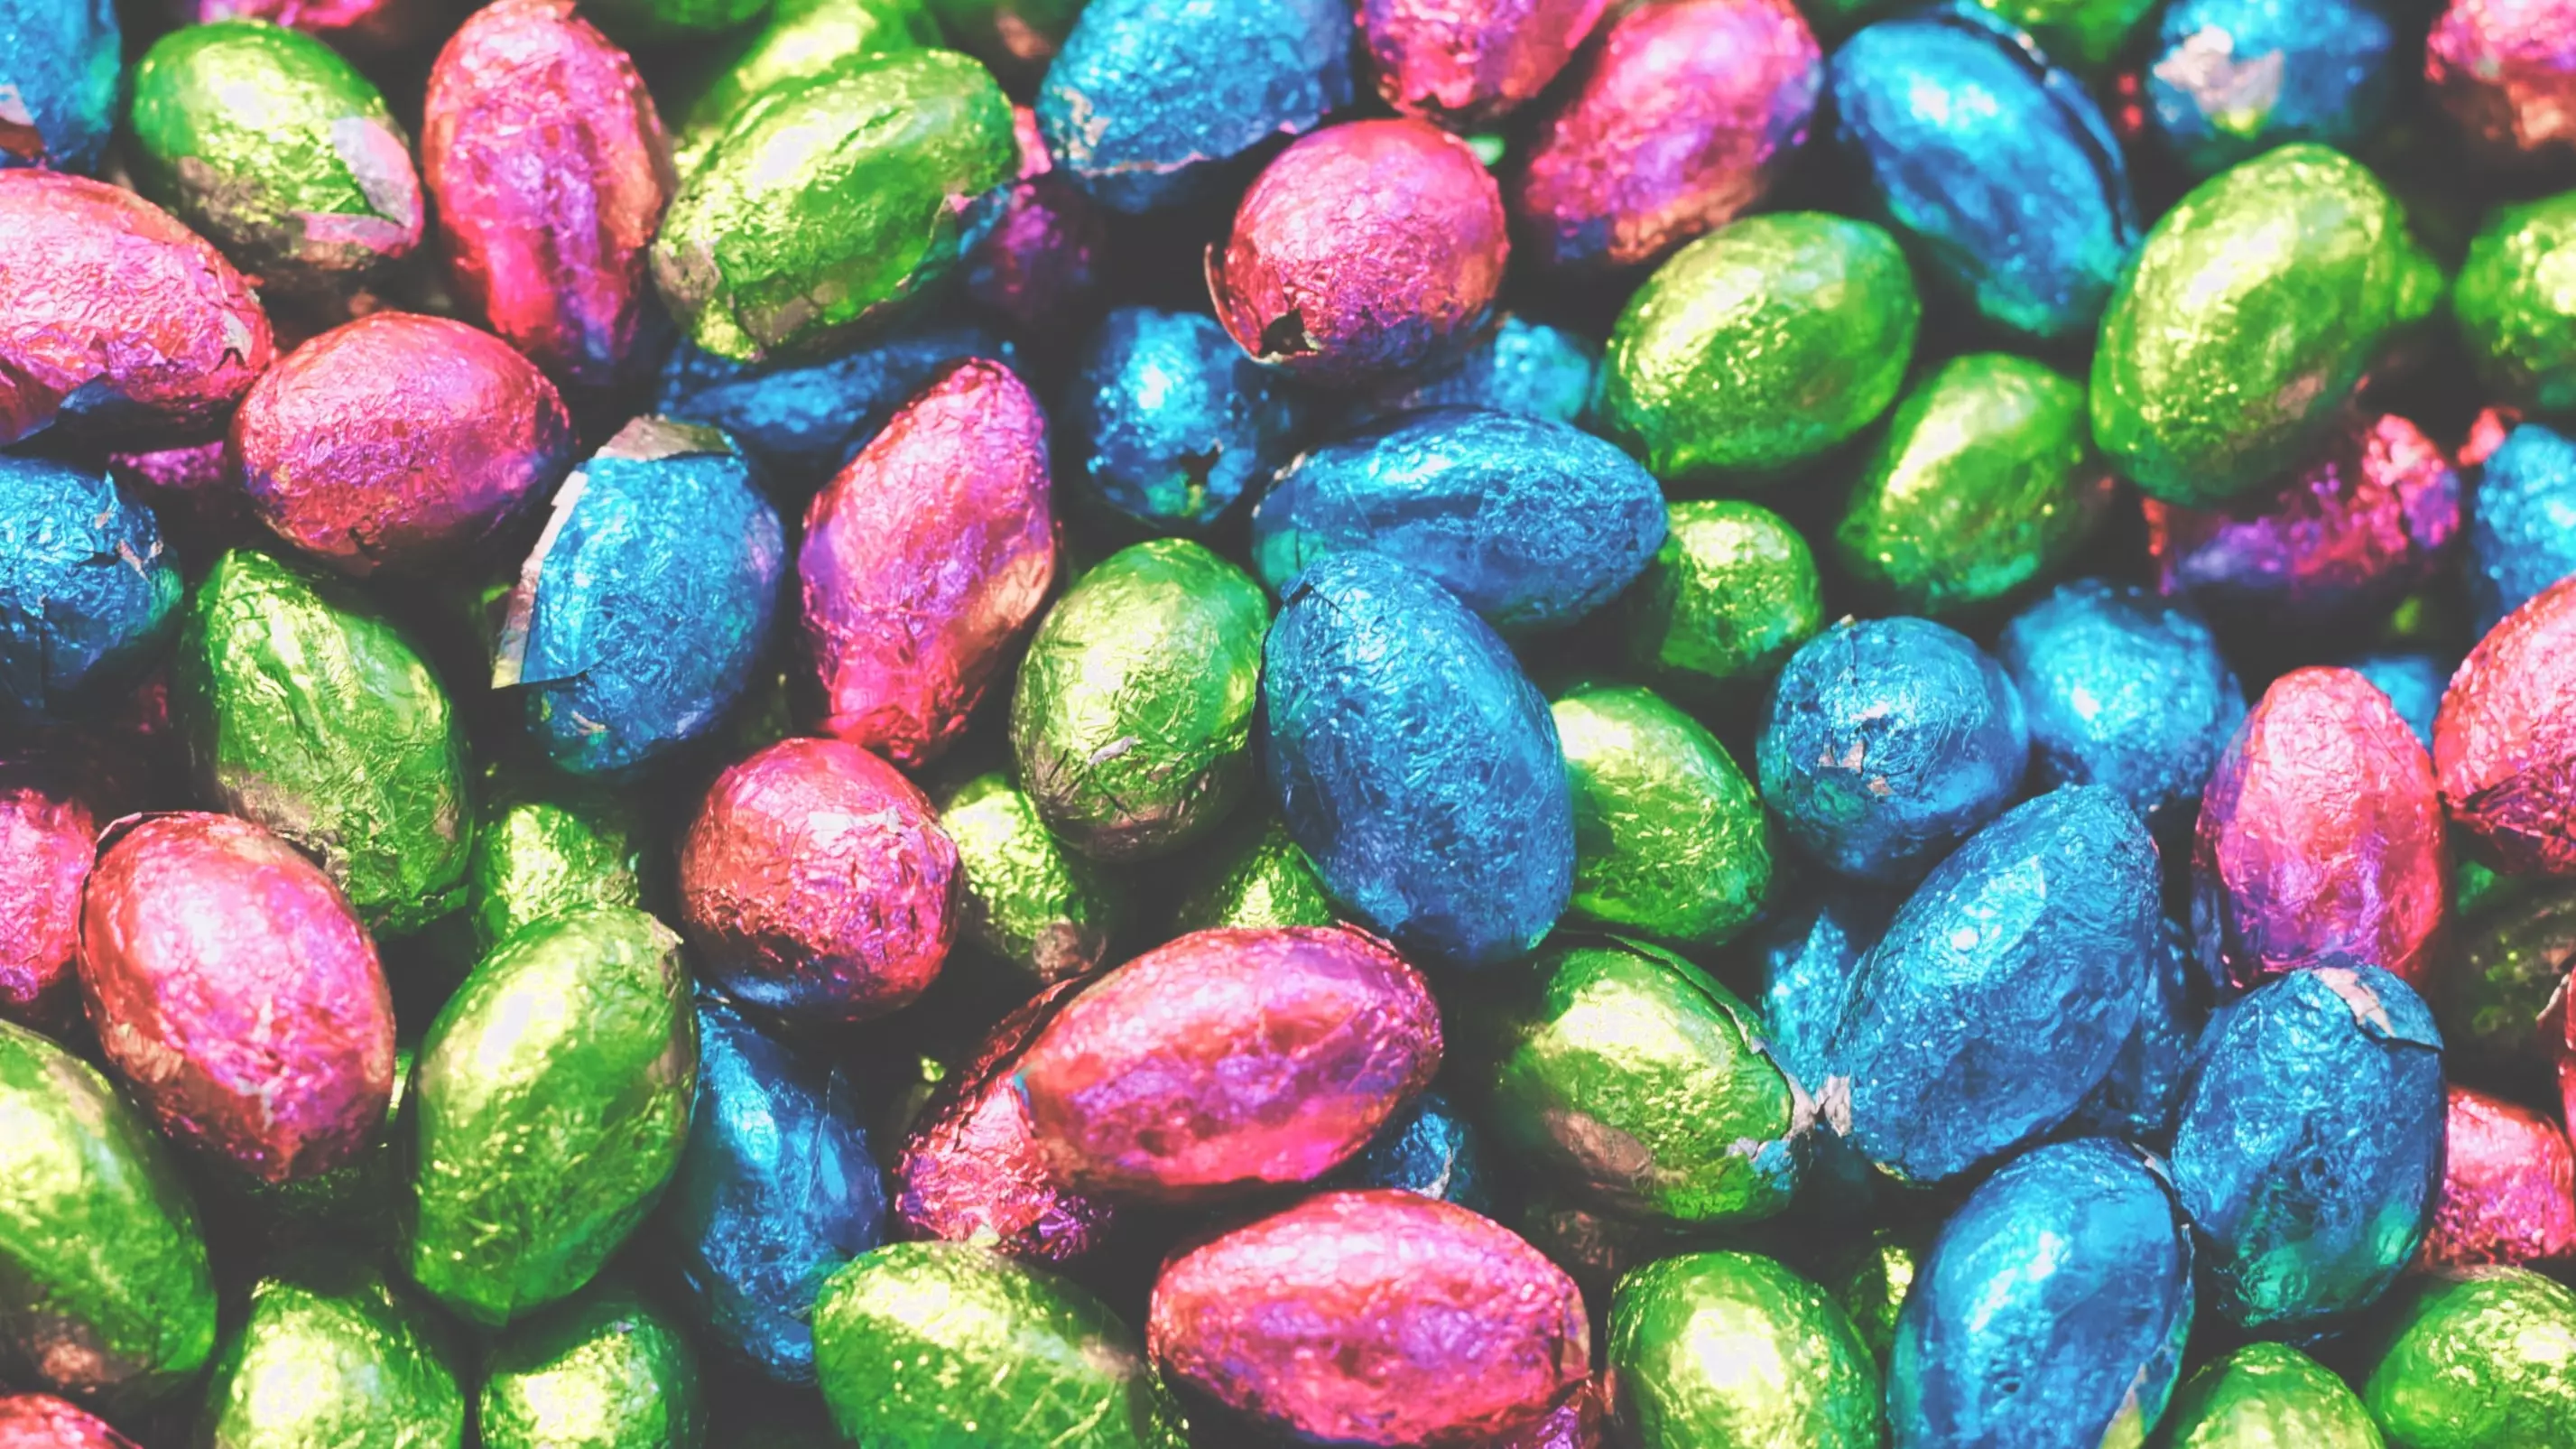 People Baffled As Easter Eggs Go On Sale In Shops Just Days After Christmas